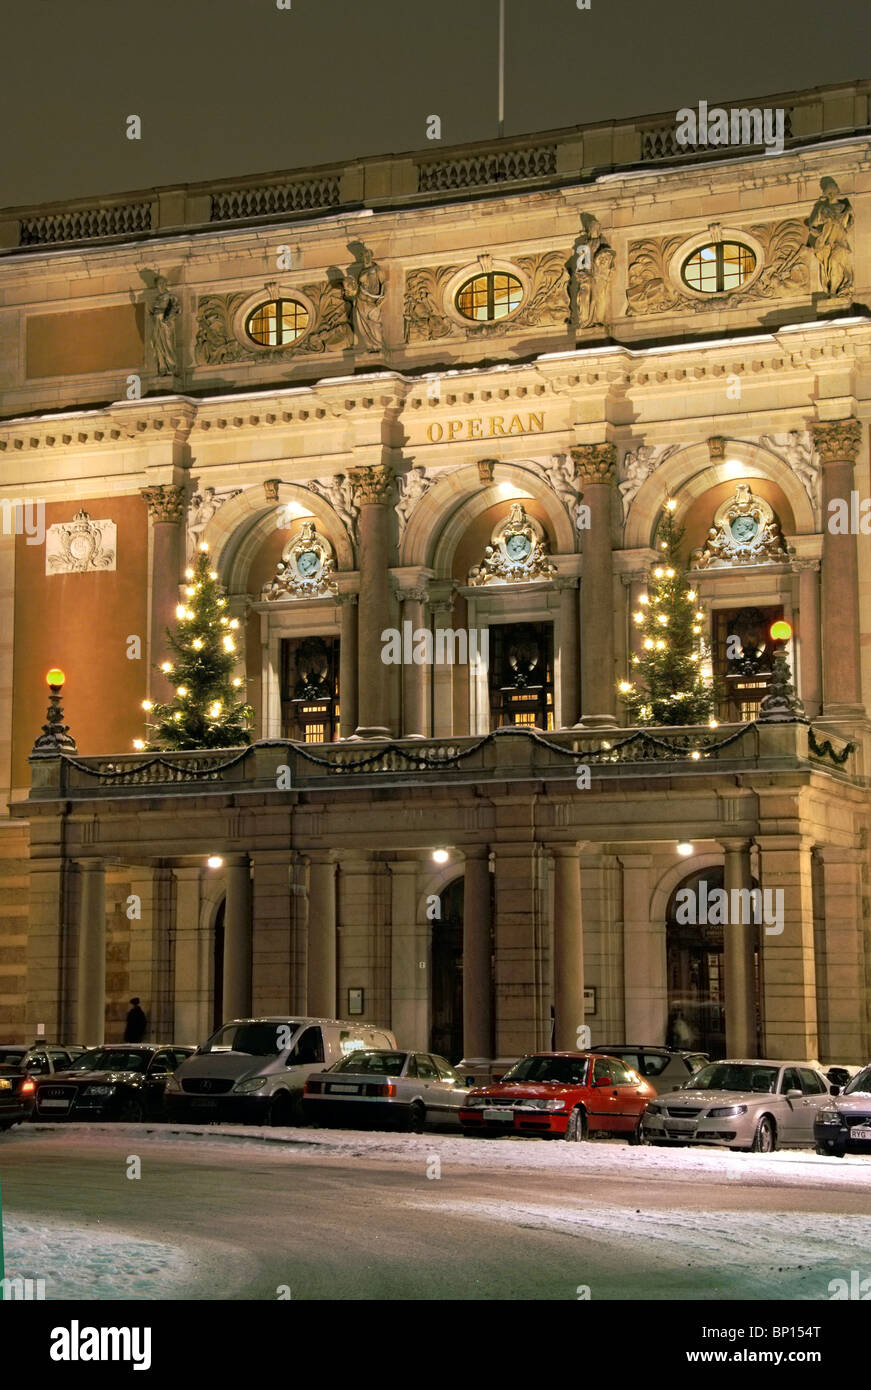 Stockholm Sweden. The Royal Opera house. Stock Photo